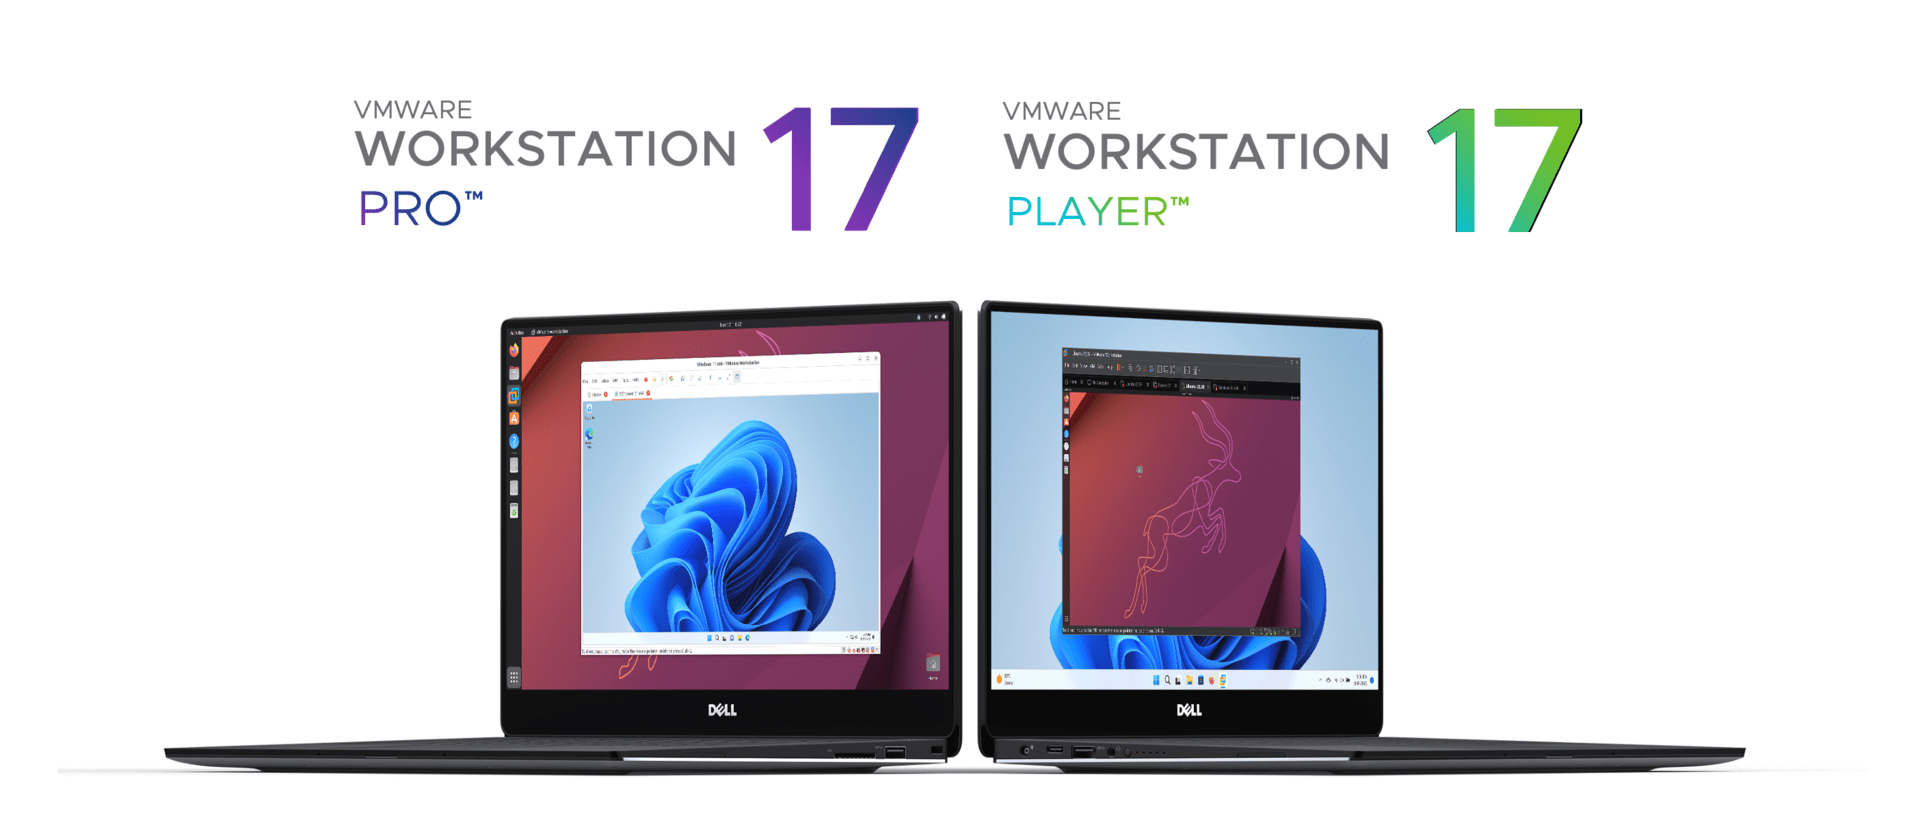 VMware Workstation 17 Pro and Player 17